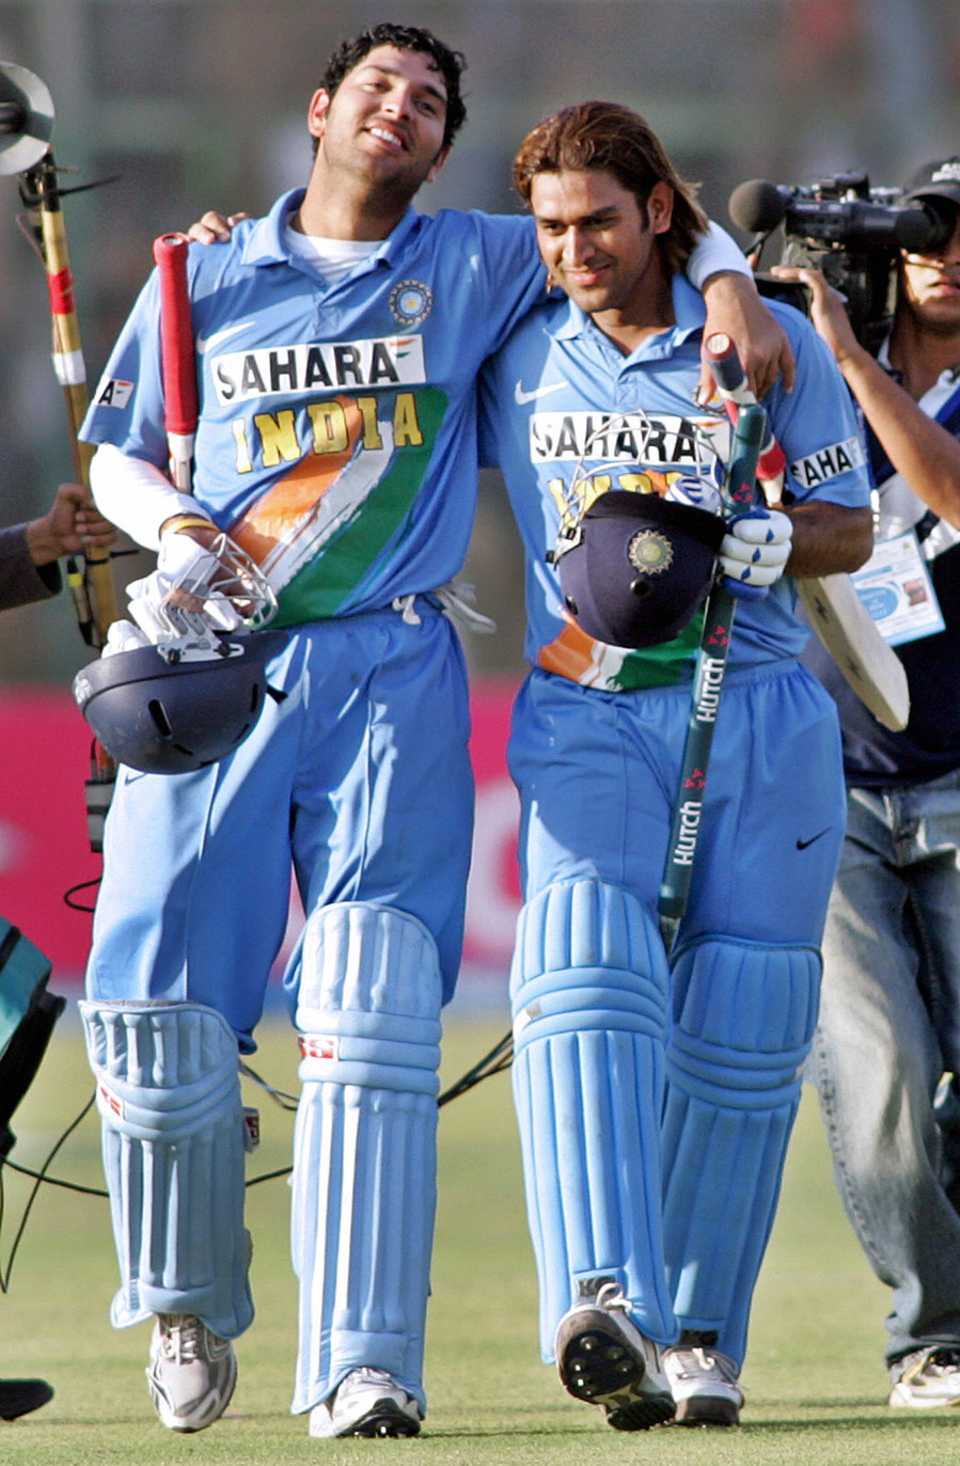 Just another day at work for Yuvraj Singh and Mahendra Singh Dhoni